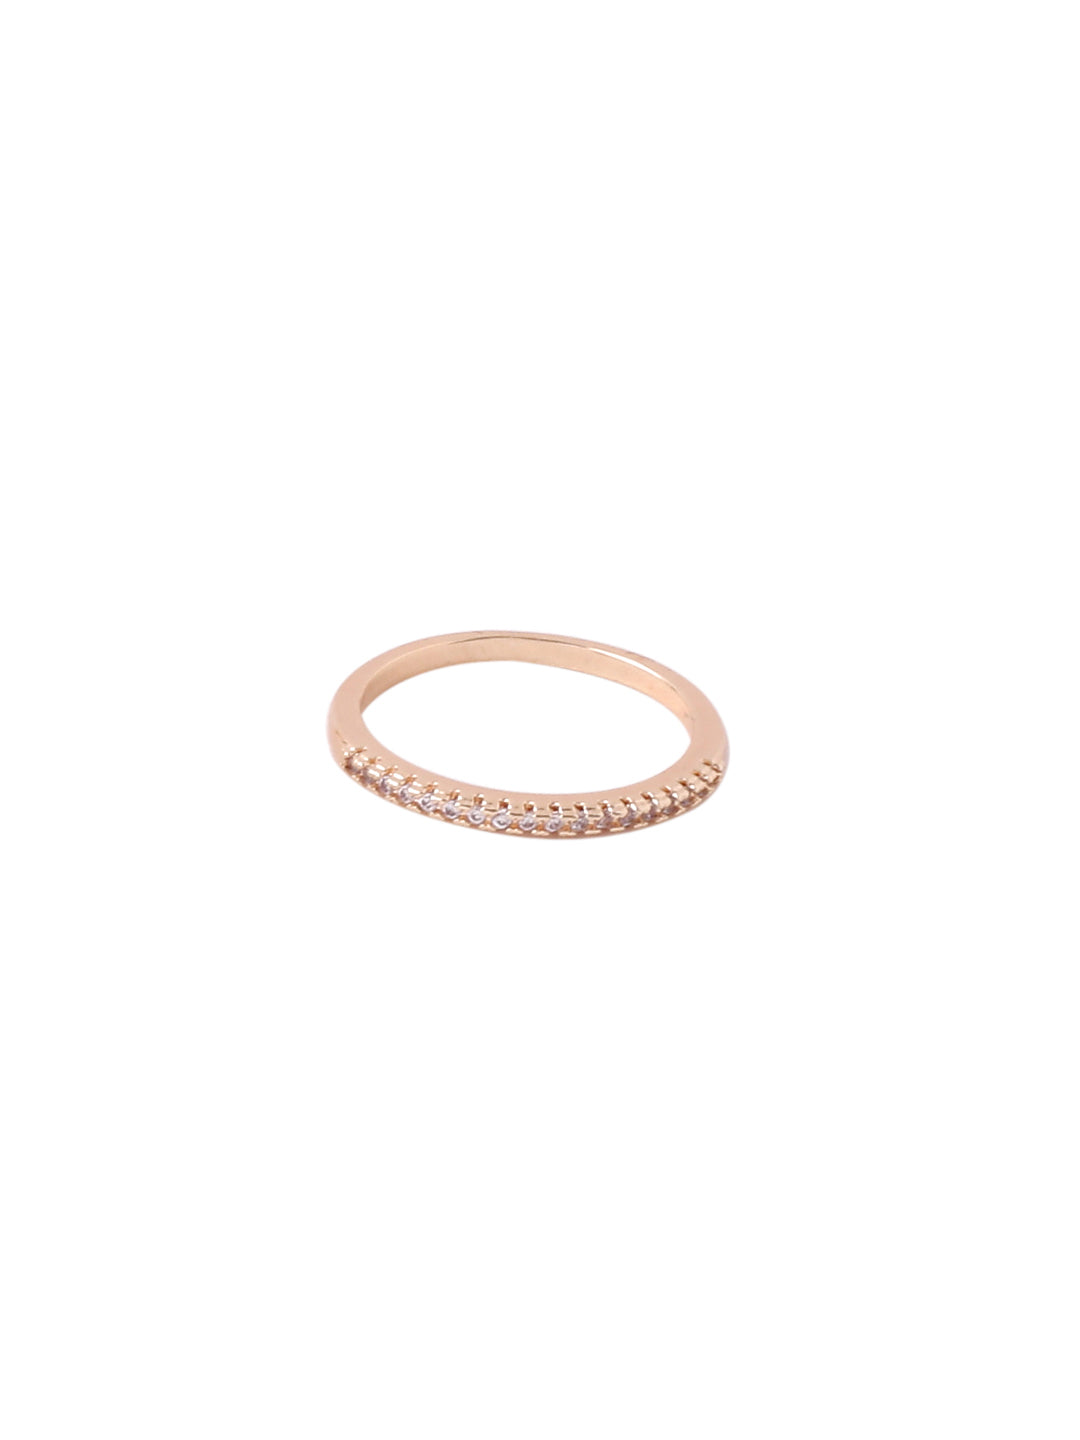 Women's Gold-Plated Stylish Ring with AD stones - NVR